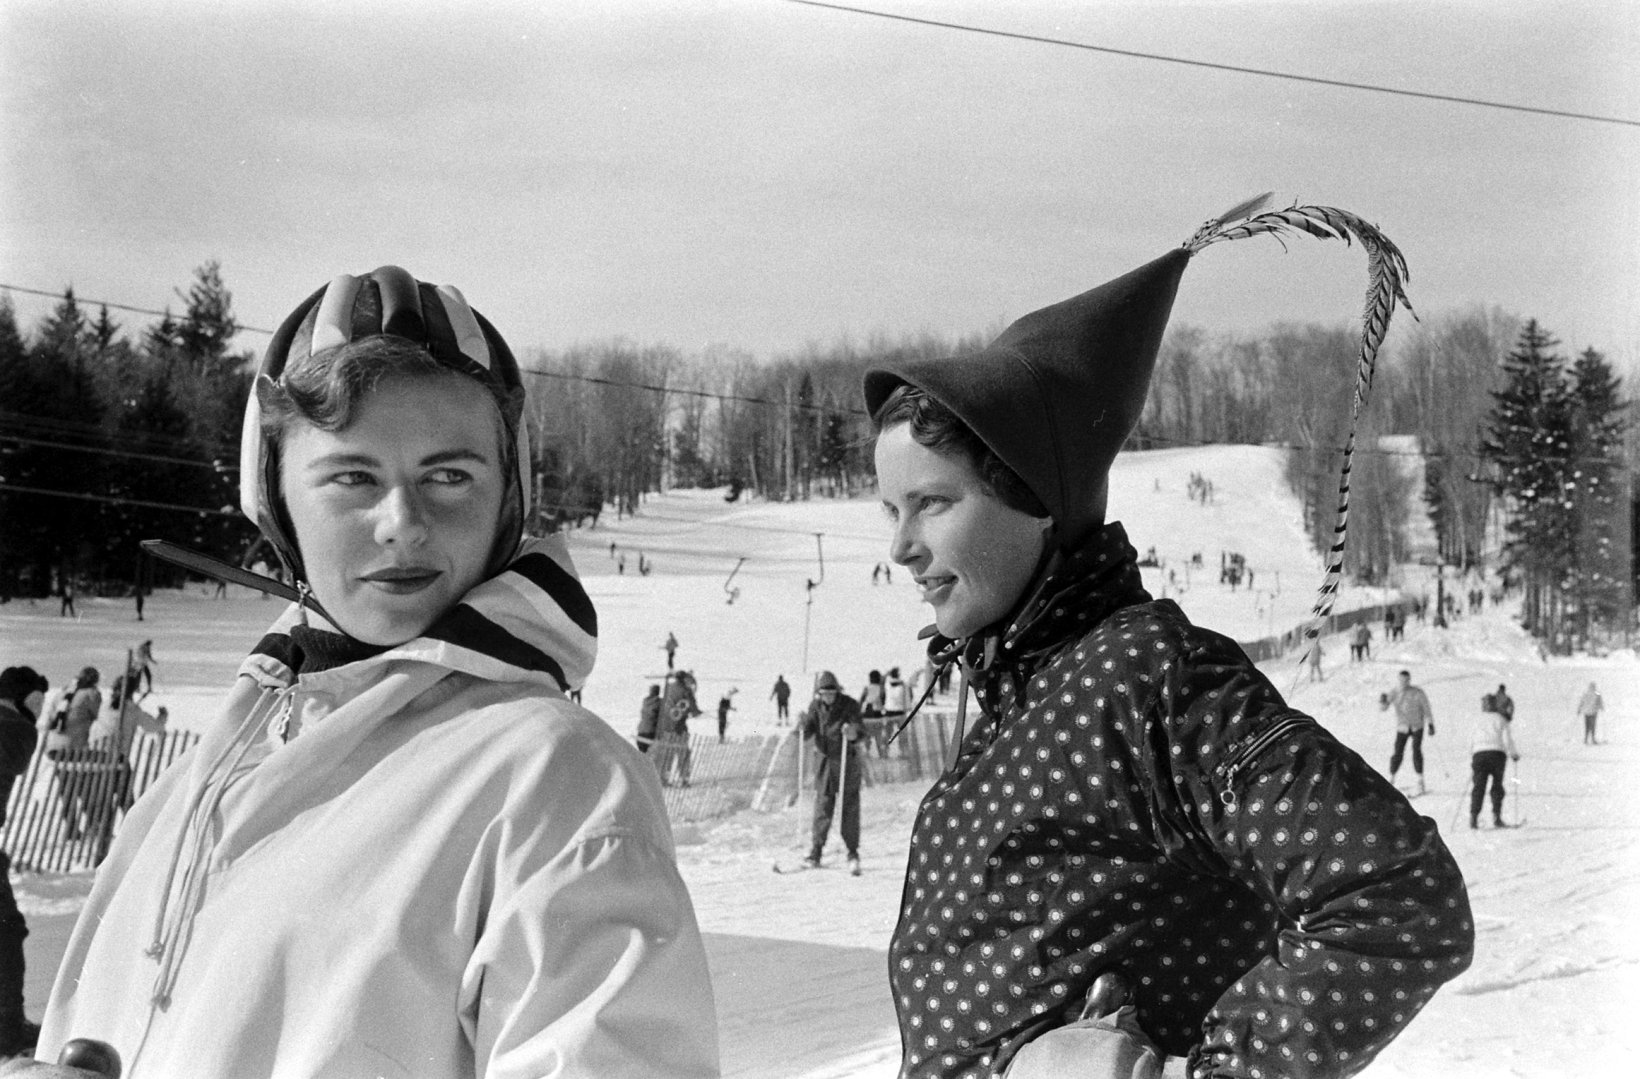 Skiing: Photos From the Early Days of the Popular Sport | Time.com